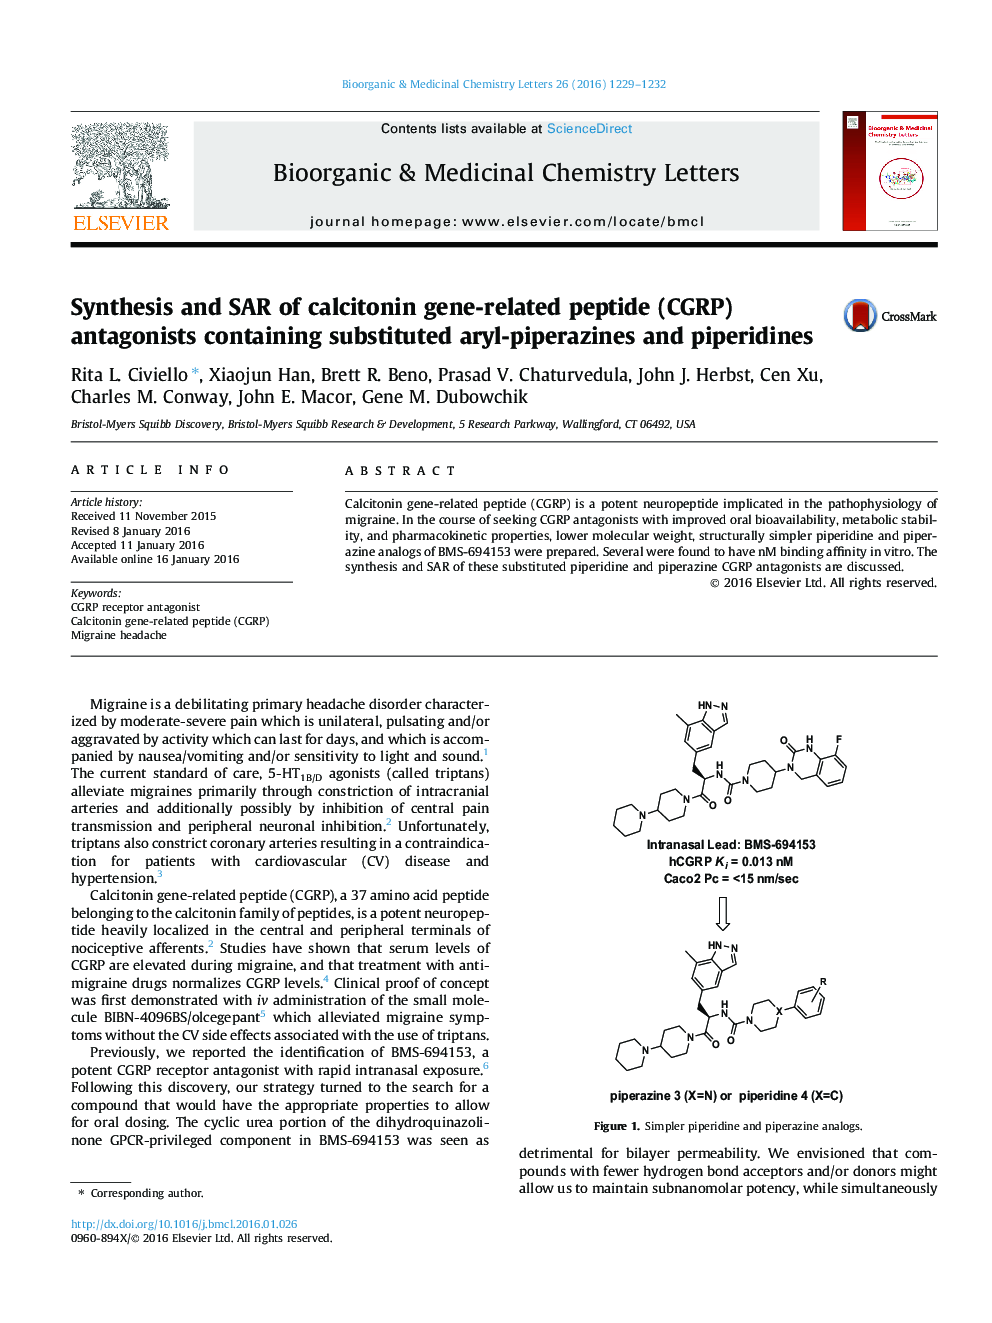 Synthesis and SAR of calcitonin gene-related peptide (CGRP) antagonists containing substituted aryl-piperazines and piperidines